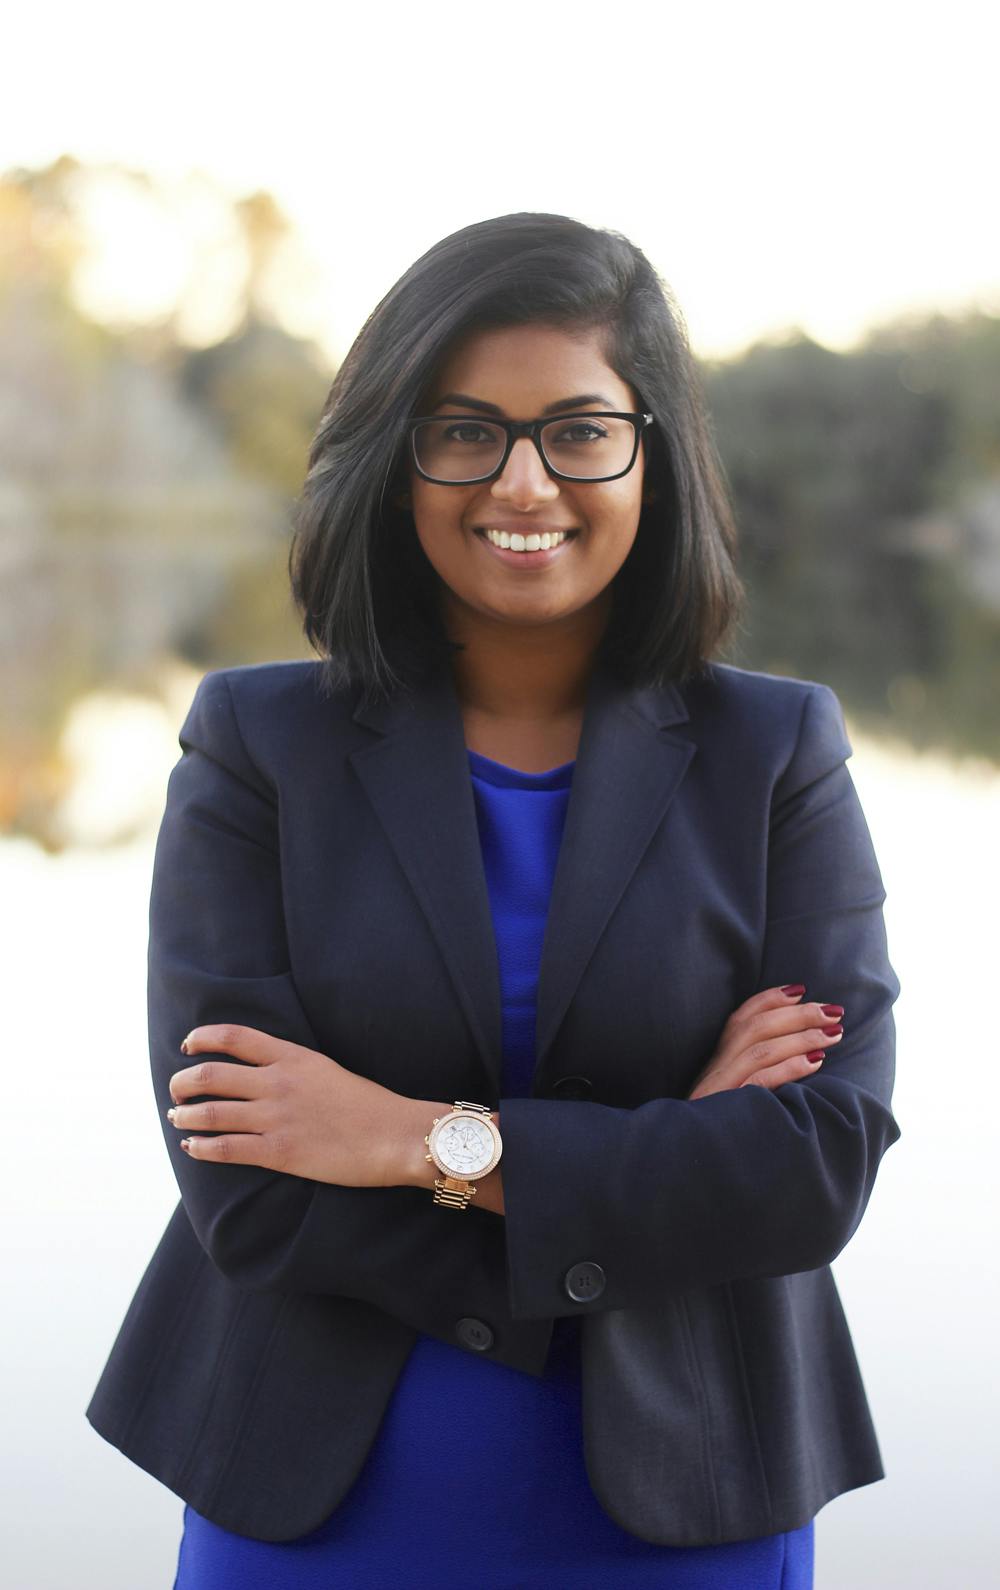 <p>Kalyani Hawaldar is a 21-year-old UF sociology and biology senior running for Student Body president with Access Party.</p><p>Hawaldar currently serves as the diversity affairs executive director in Student Government. She is a Florida Cicerone, a member of Gatorship Staff 2016 and was a part of the Preview staff in 2014. She is part of the Reitz Scholars program and was a member of a task force to create gender-neutral restrooms.</p><p>She said she hopes to continue working with UF’s administration to help students succeed.</p><p>“I’m really running to serve as a voice for the Student Body, for all students struggling and striving to be successful,” she said. “My biggest goal is to make sure that students are able to fulfill their potentials here.”</p>